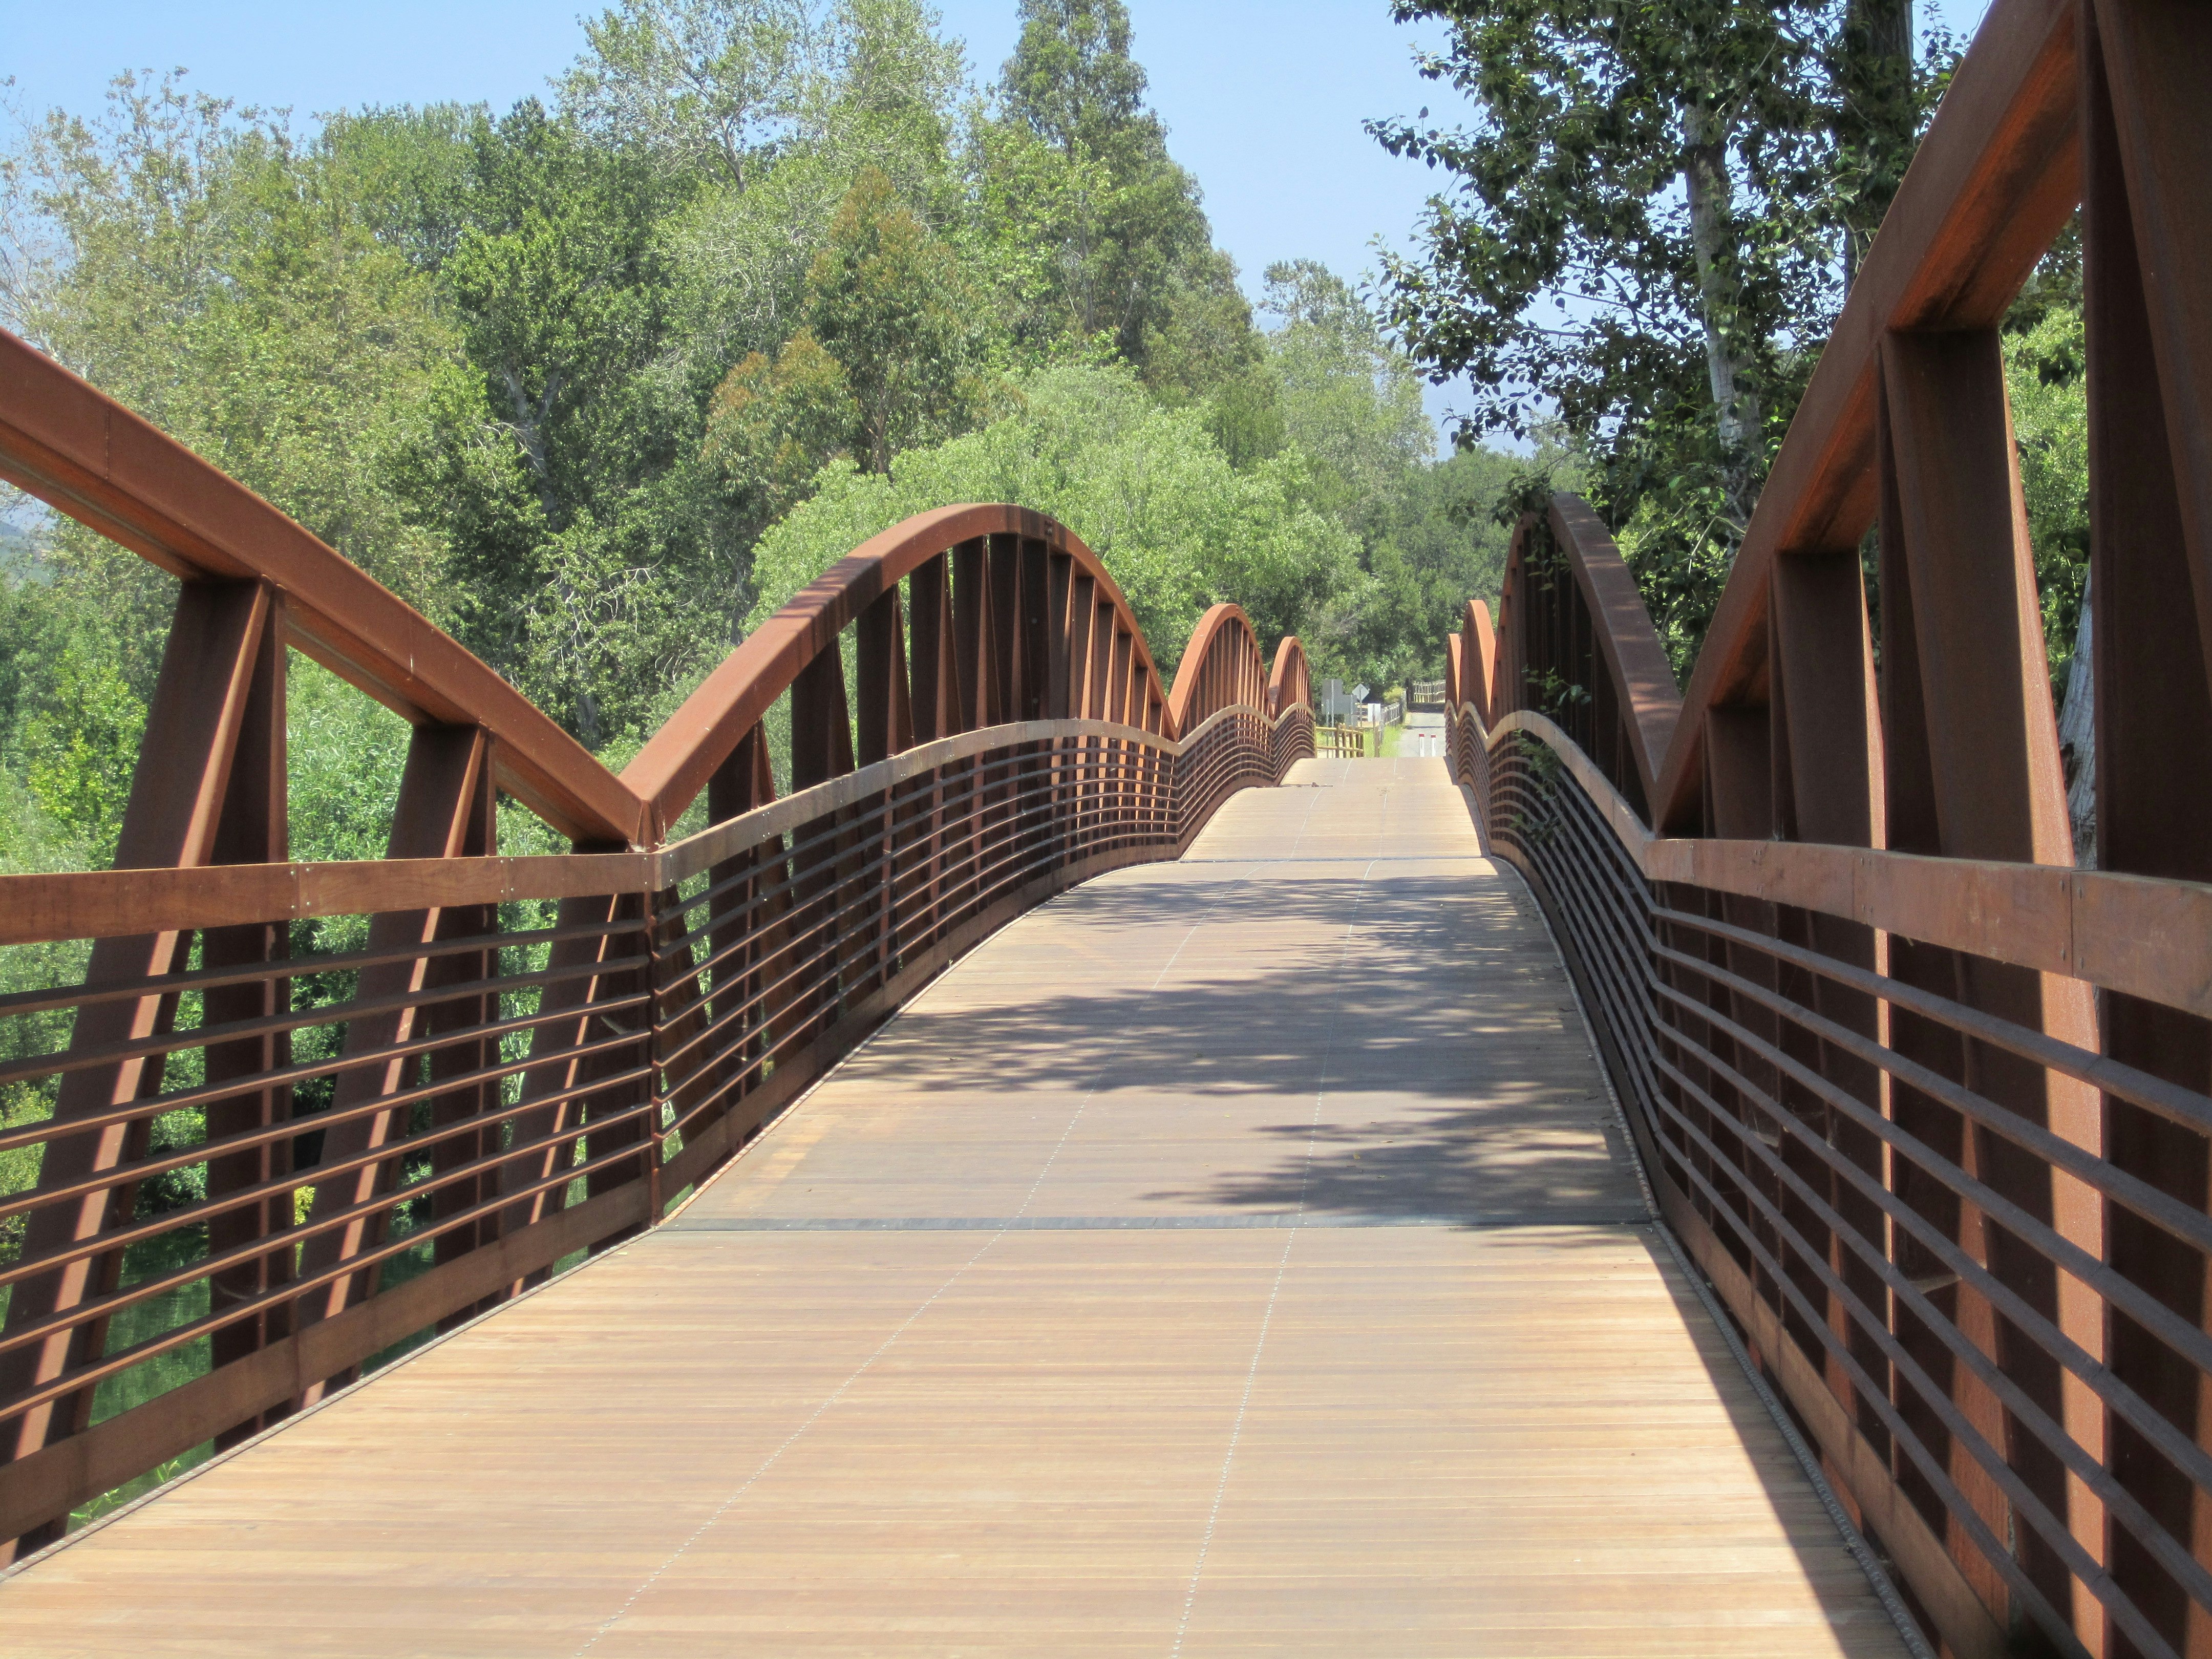 An orangey brown metal bridge made up of several horizontal slats under an arching, undulating portion that looks like the mountains in the area is filled in with a light brown wooden deck. The bridge itself undulates slightly and is surrounded by trees. It's part of the Ventura Trail rail to trail conversion to Ojai.